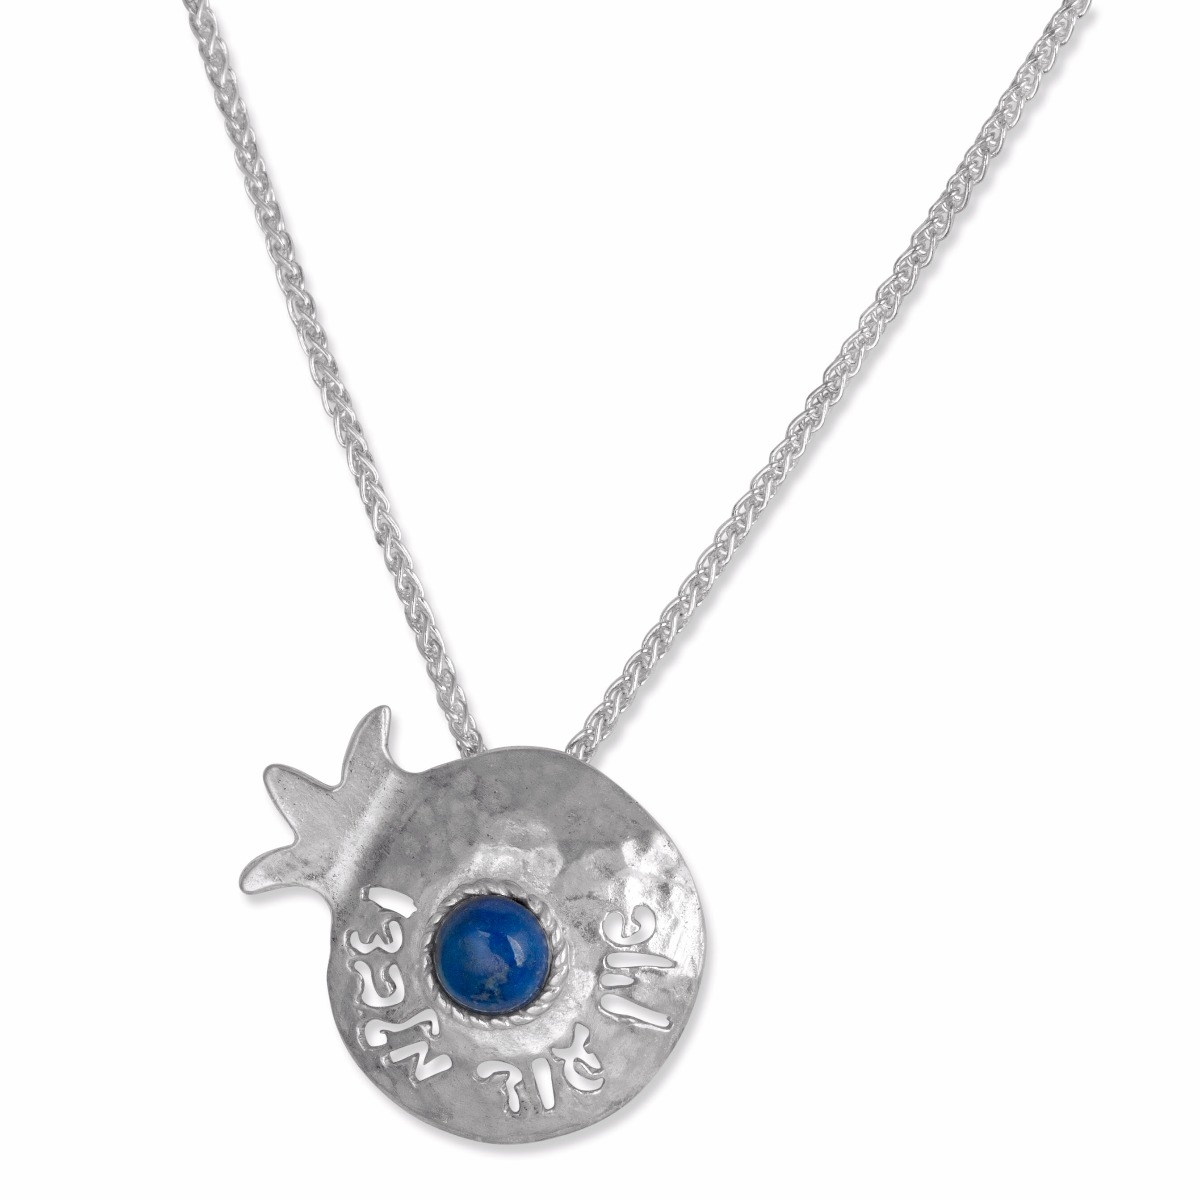 Sterling Silver Pomegranate Pendant with Blue Gemstone  - 1